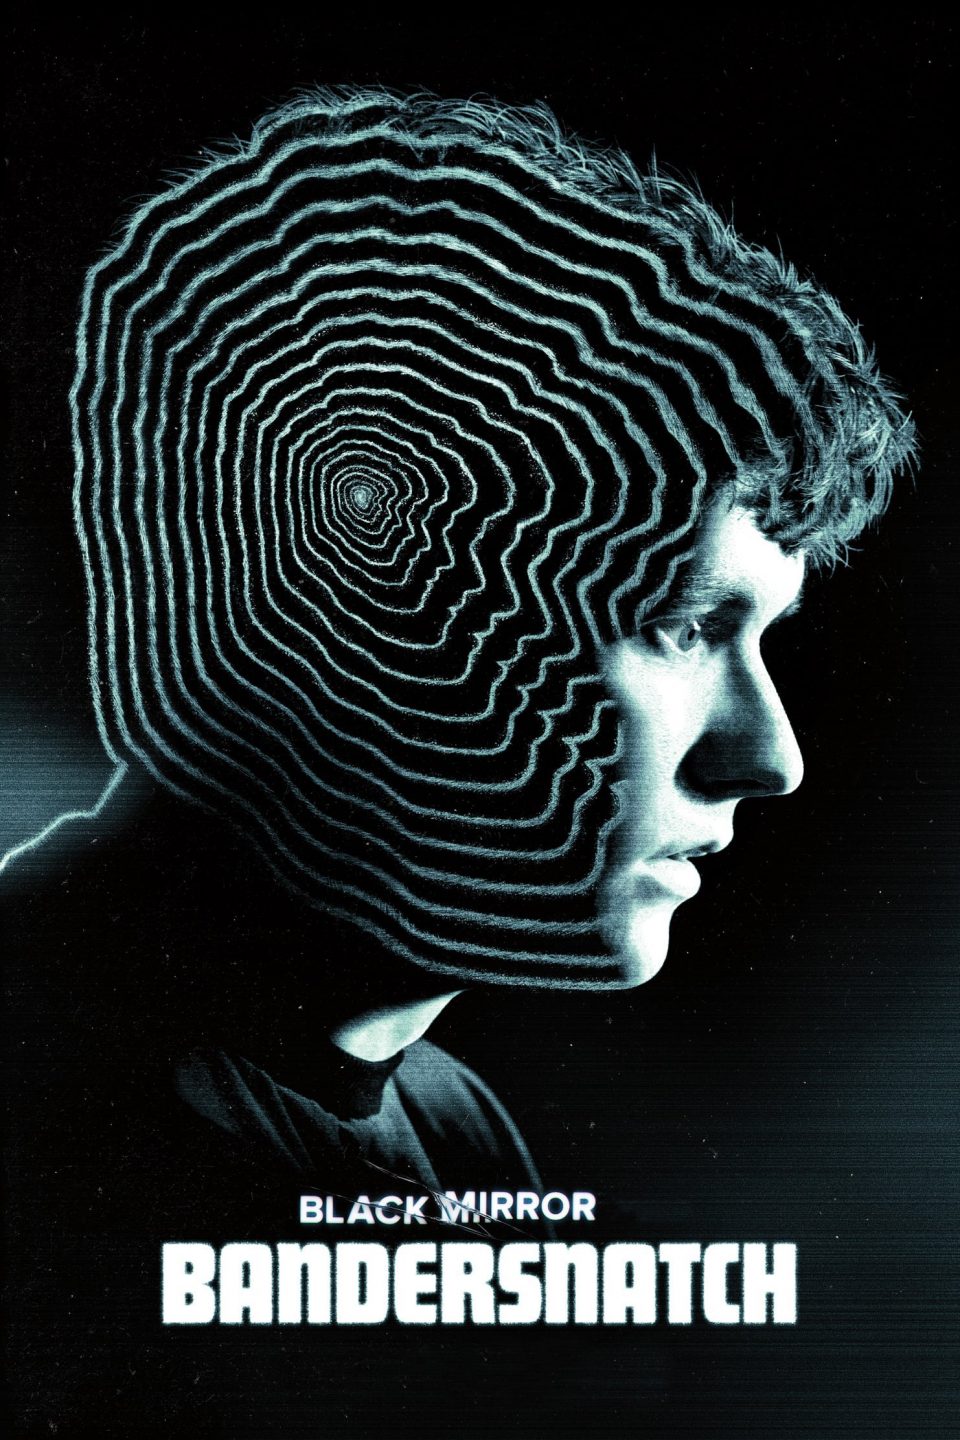 Poster for the movie "Black Mirror: Bandersnatch"